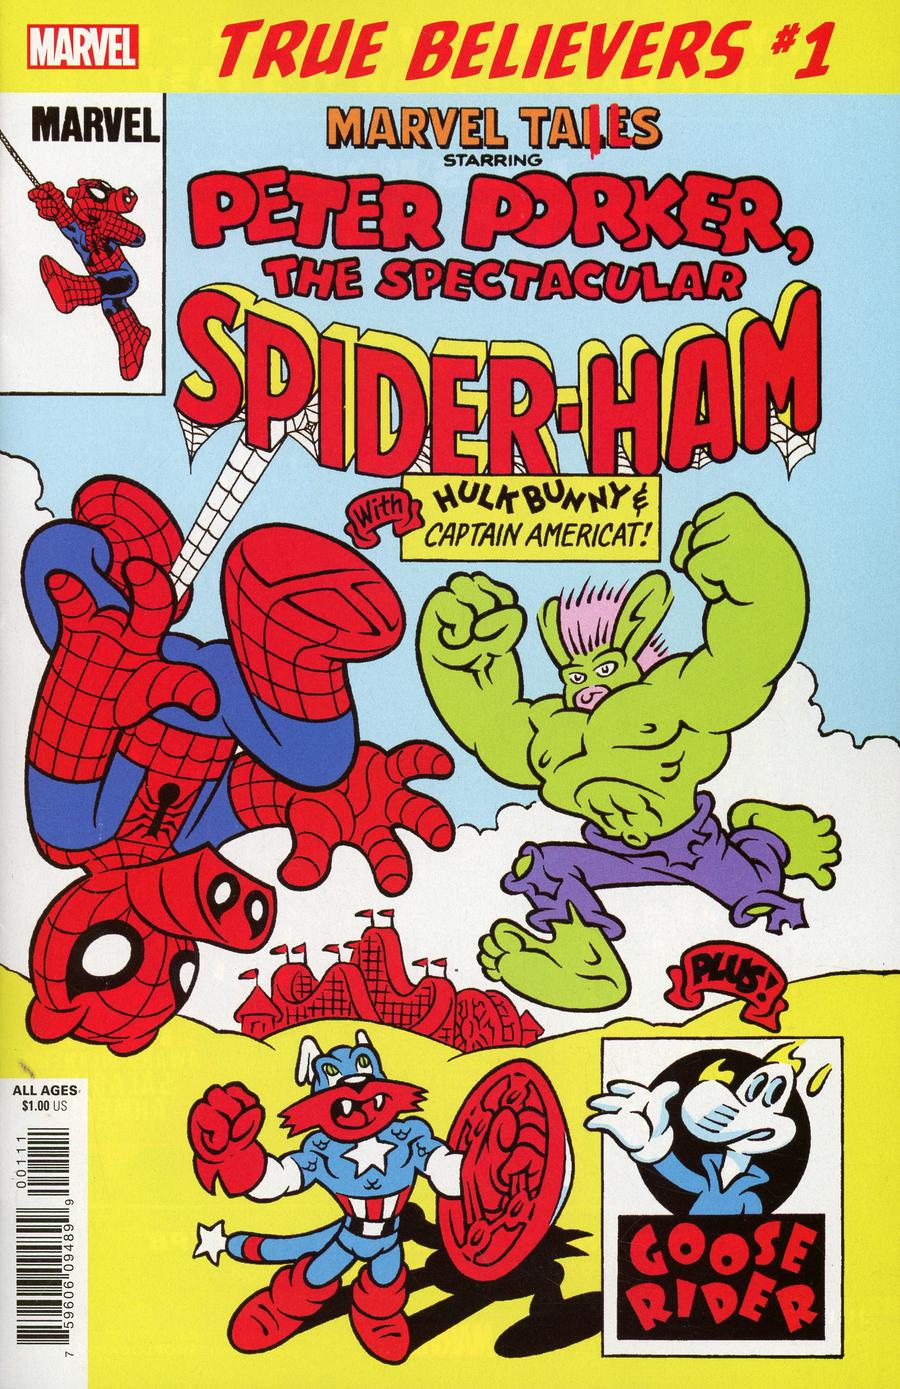 True Believers Marvel Tails Starring Peter Porker The Spectacular Spider-Ham #1 Cover A Regular Cover